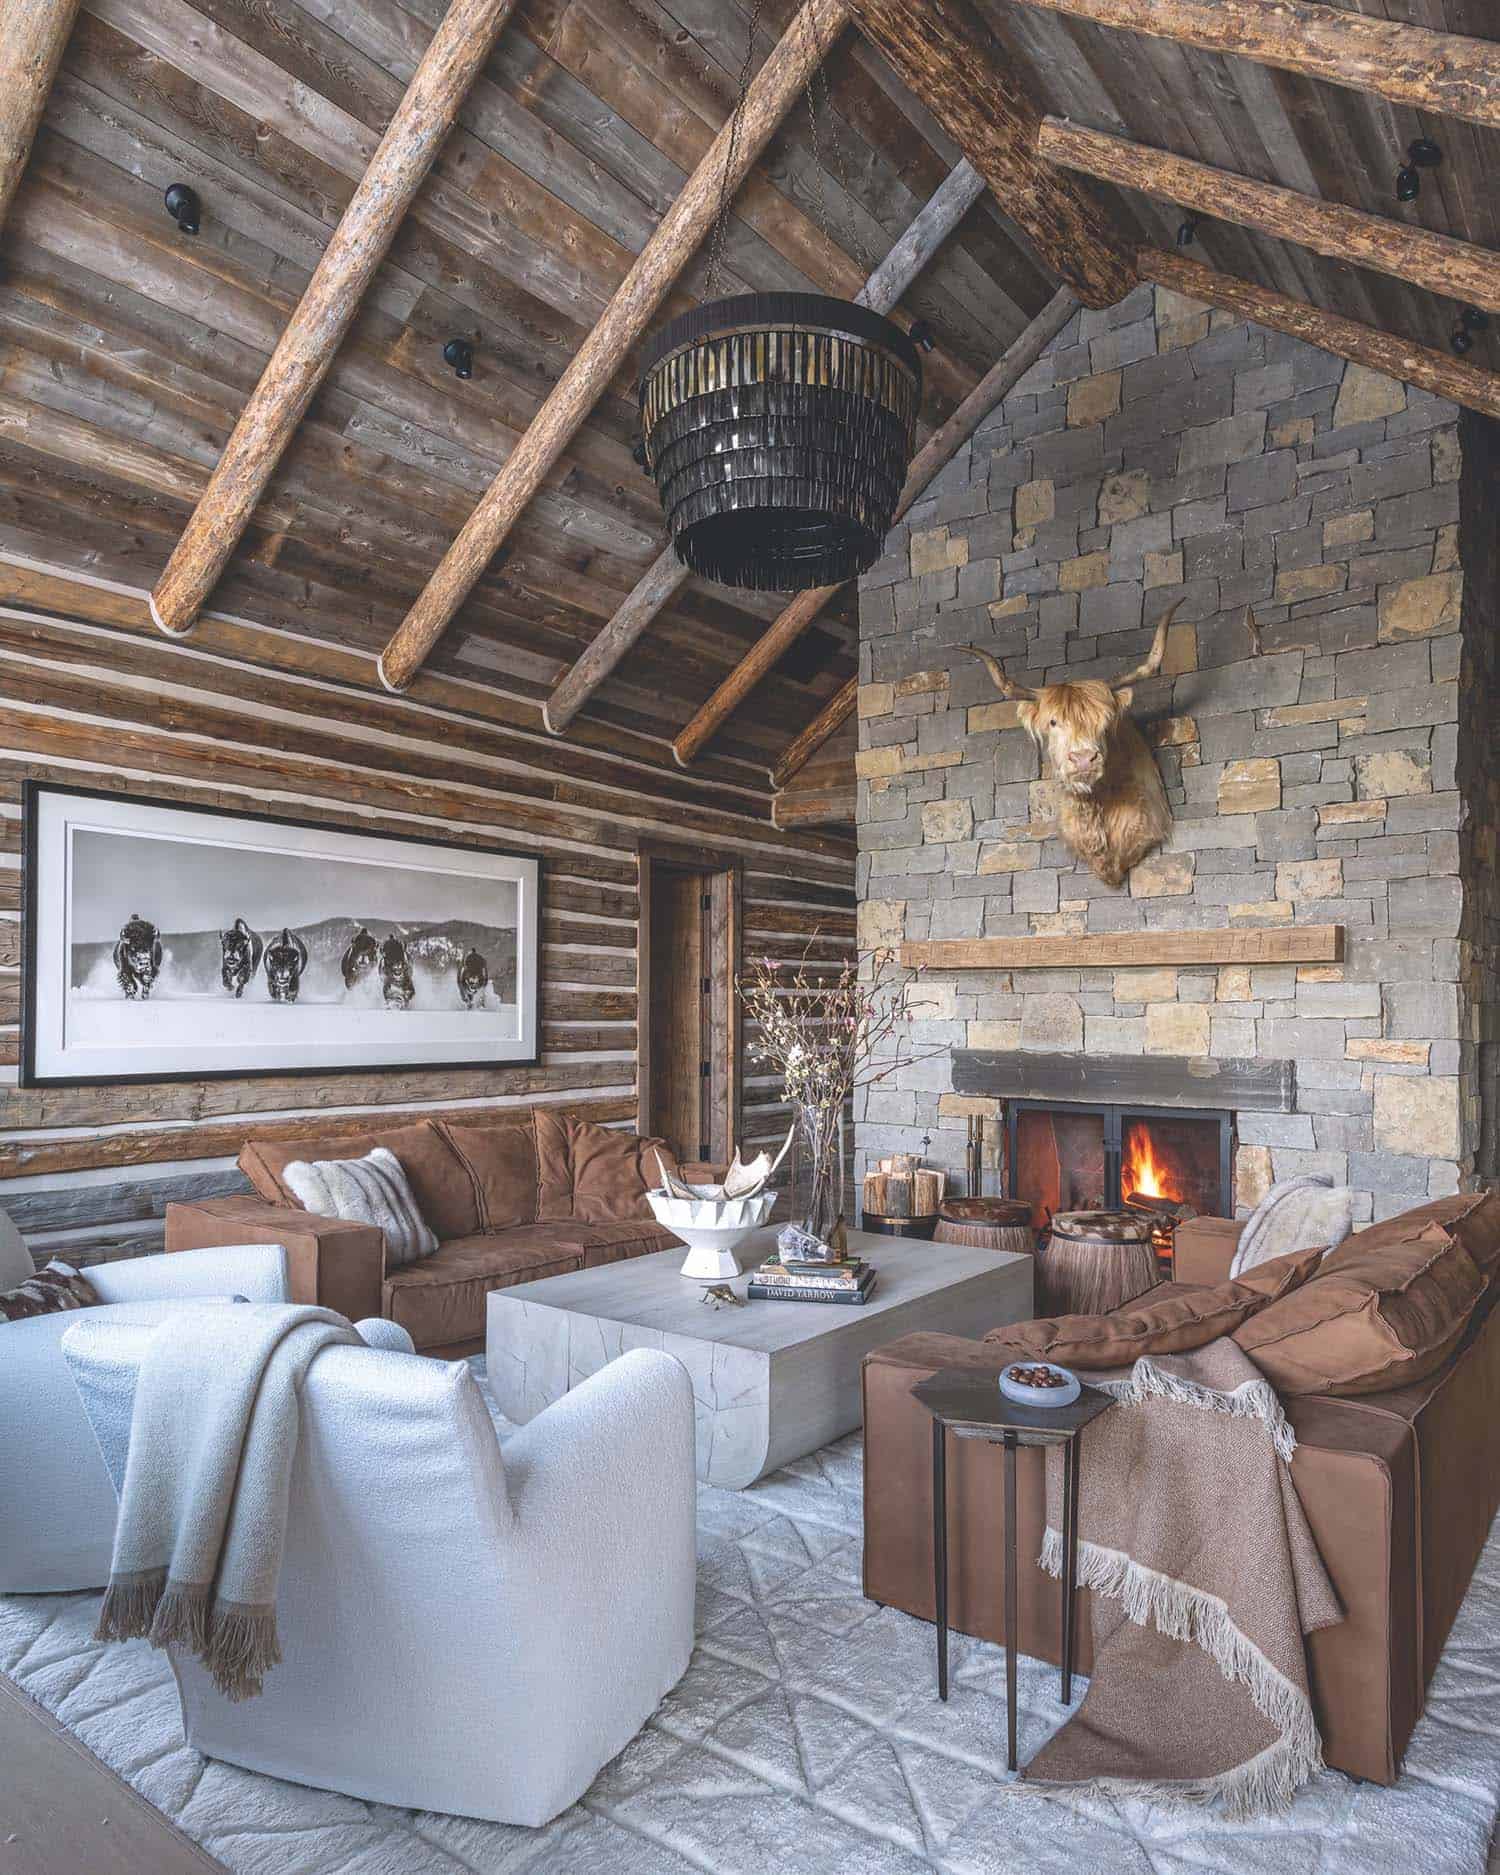 Modern, rustic living room with fireplace